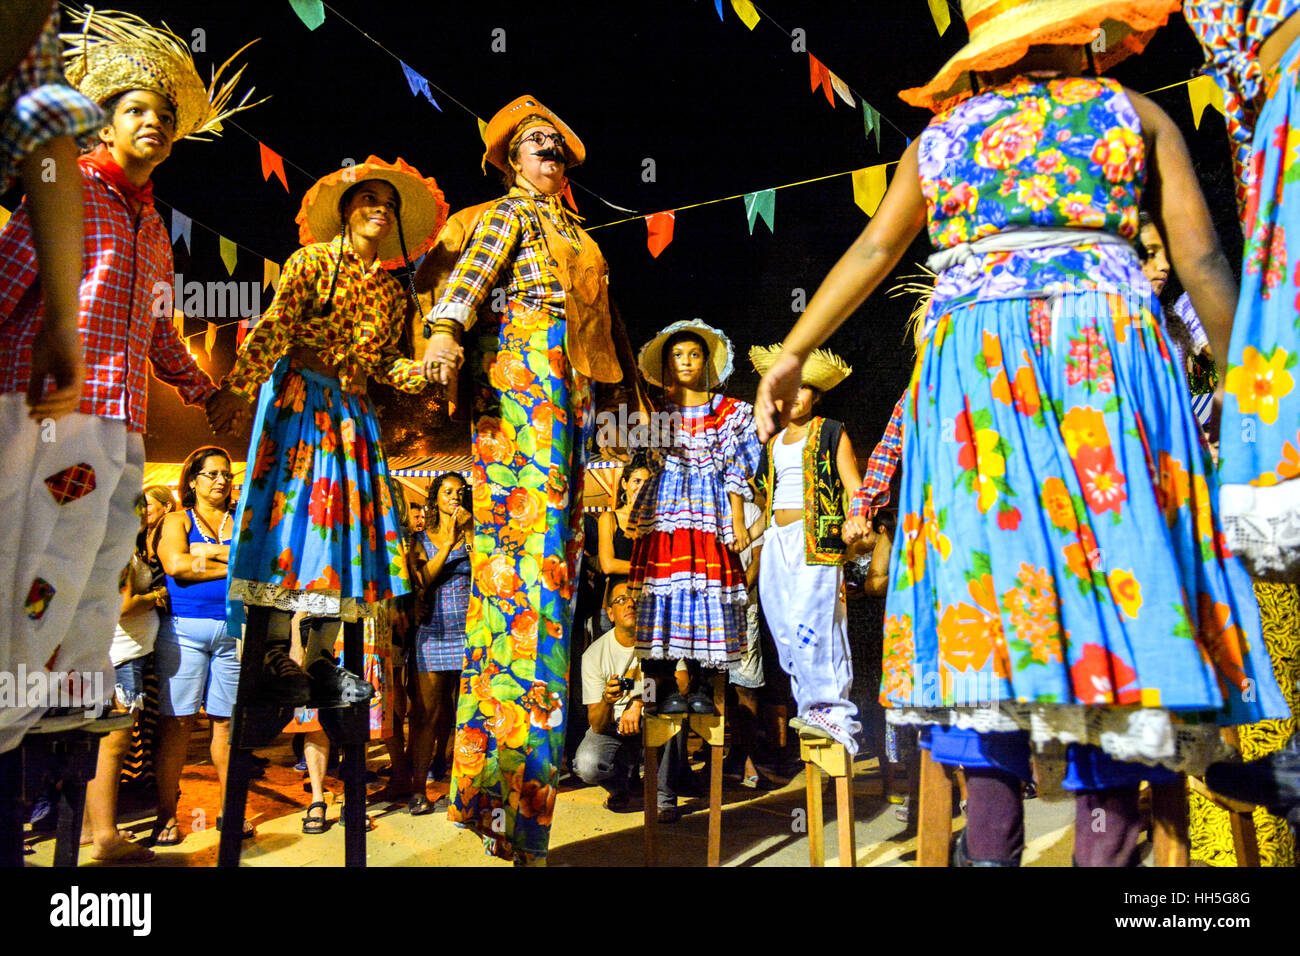 People in country costumes perform Festa Junina, or in English 'June Holiday/Party' Brazil's month long celebration of the harvest and rural life. Stock Photo